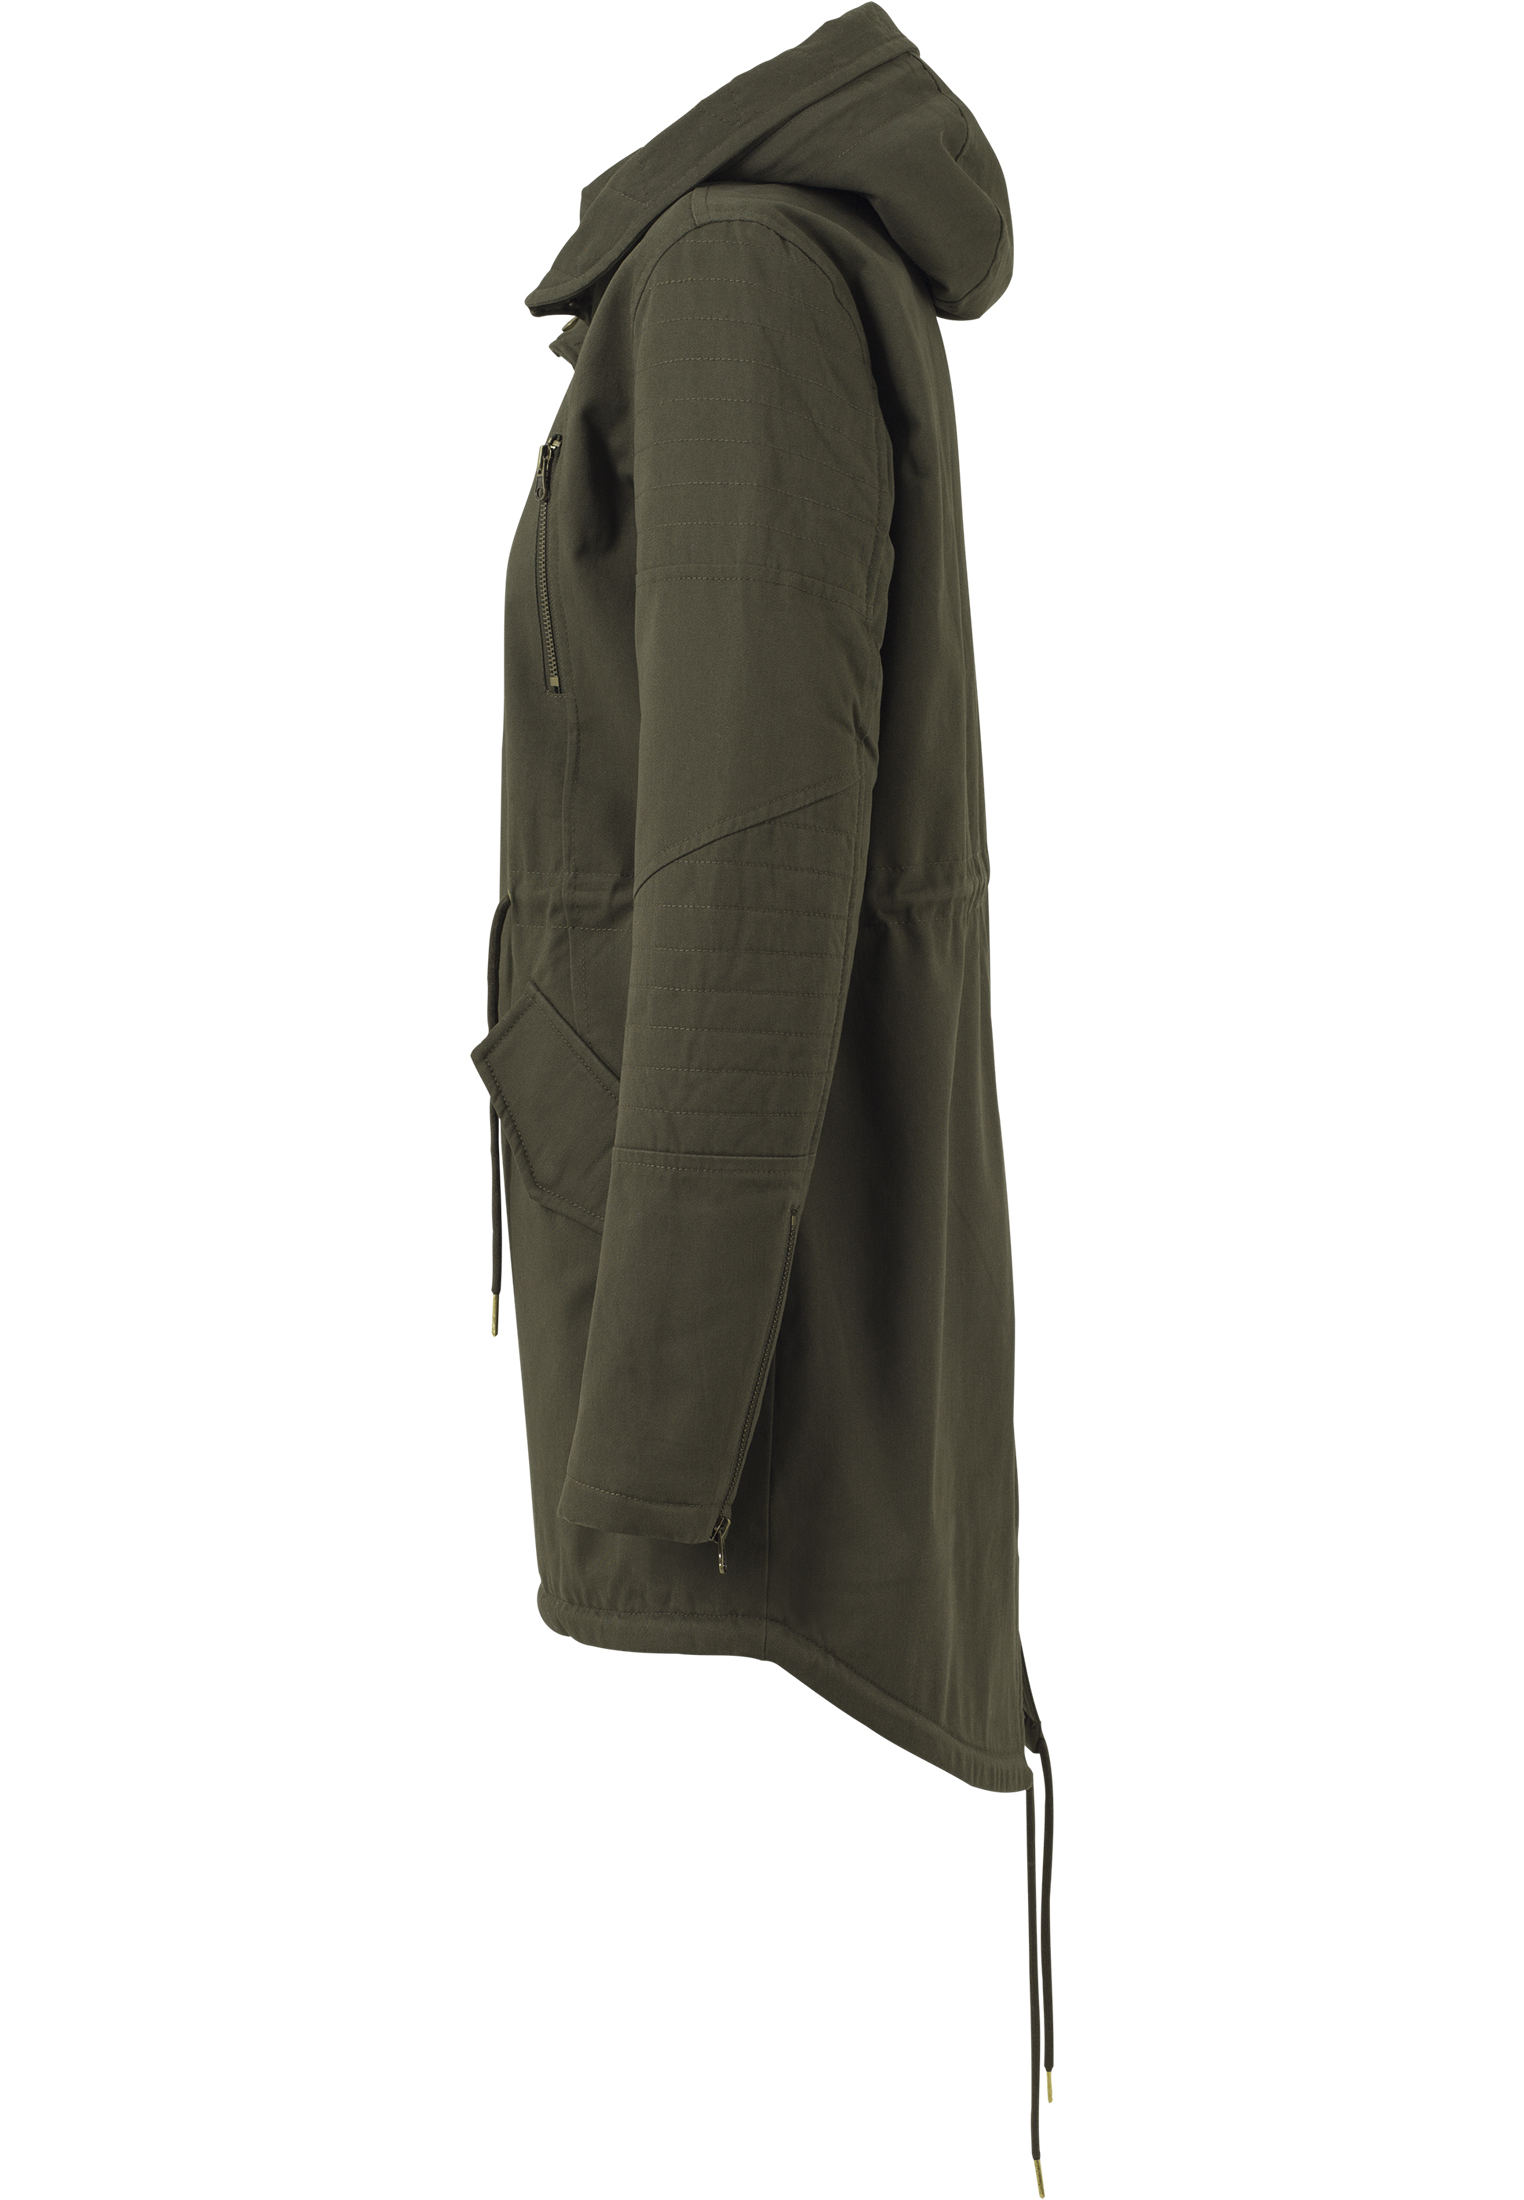 Winter Jacken Ladies Sherpa Lined Cotton Parka in Farbe olive